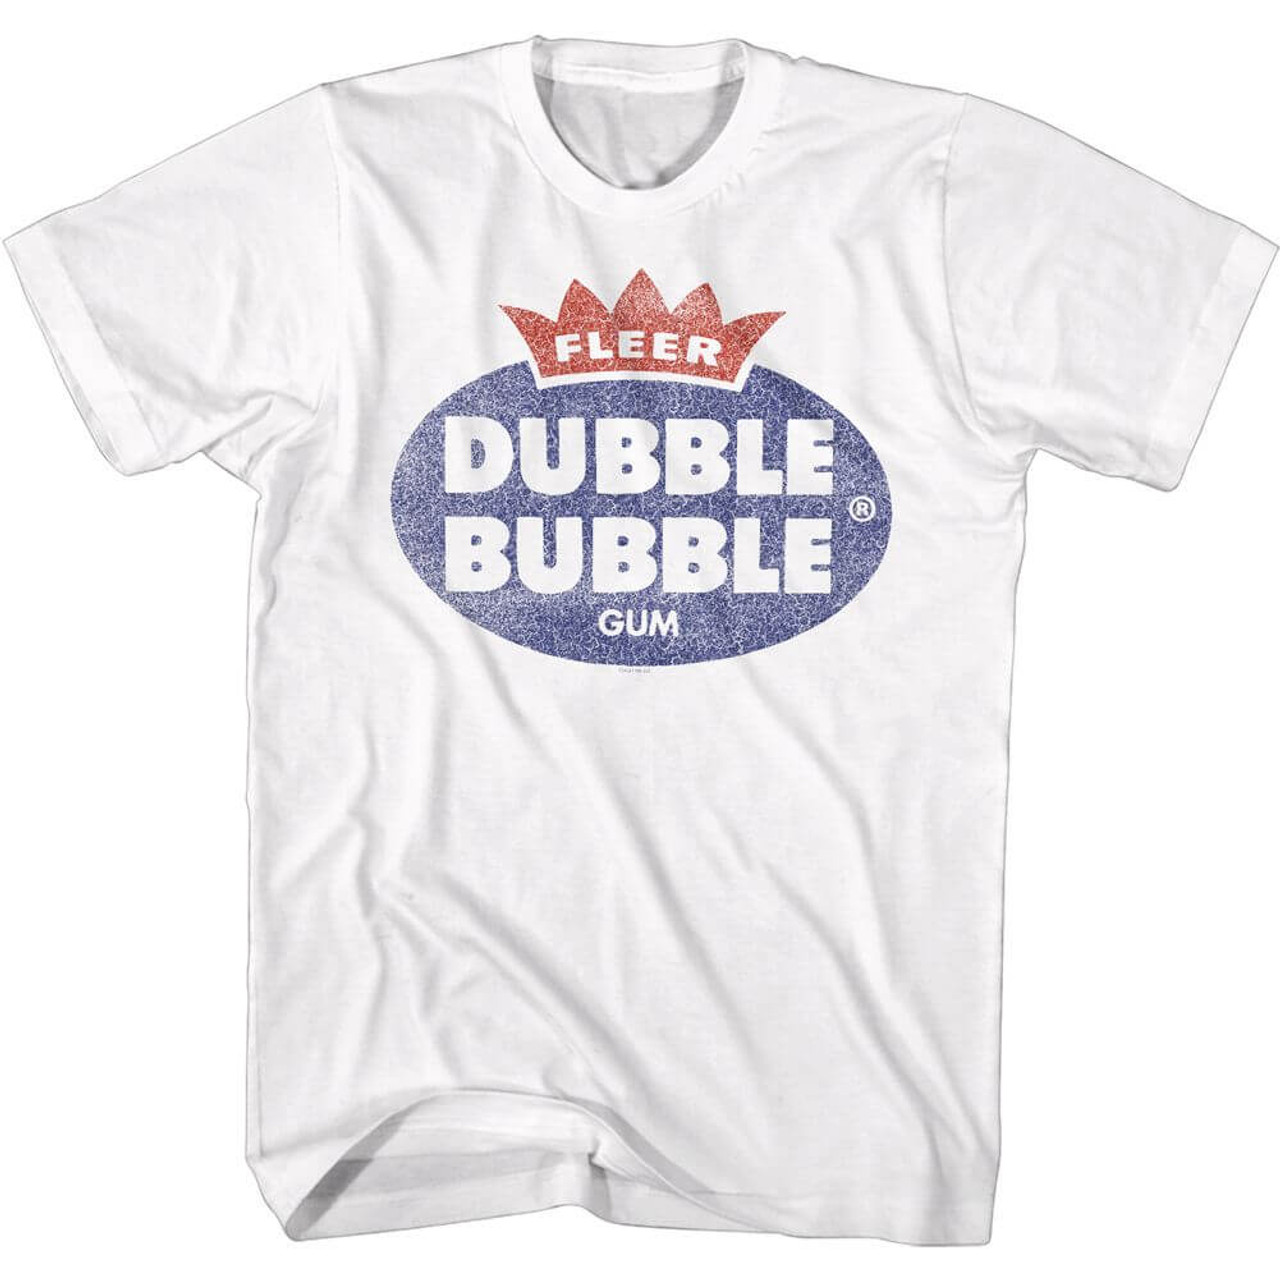 The Best Vintage Graphic T-Shirts of the NBA Bubble